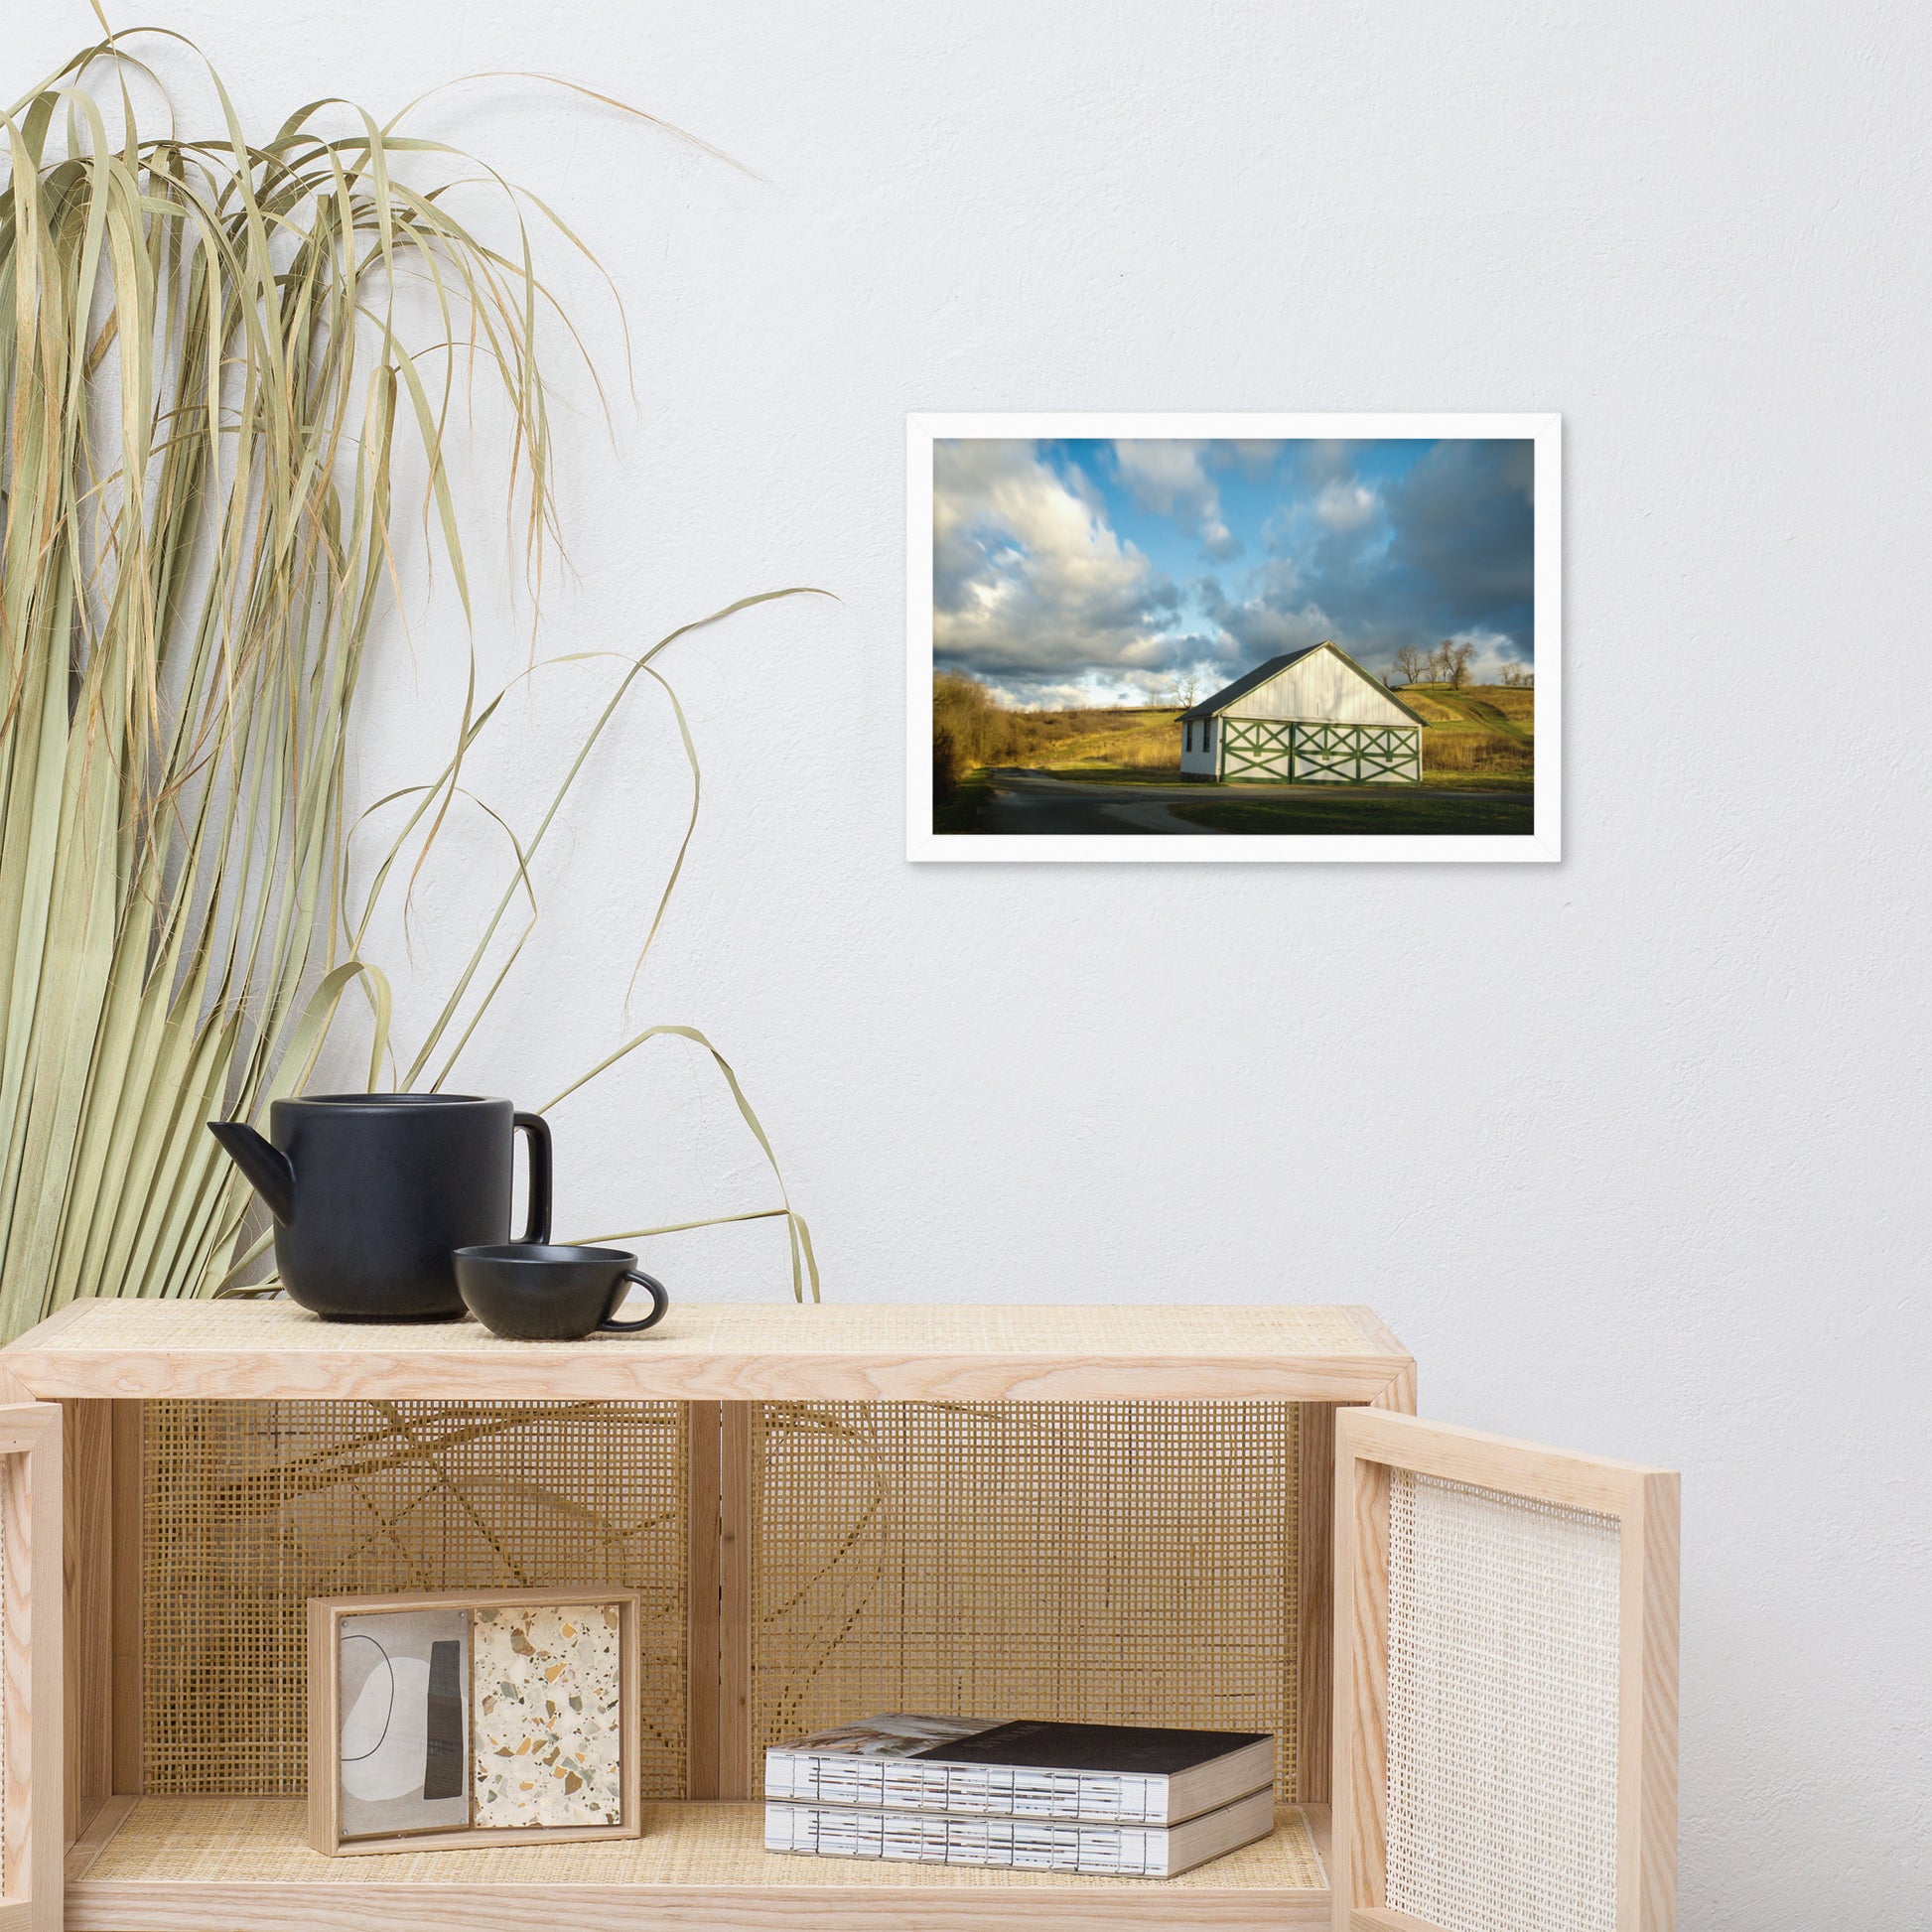 Pictures To Hang In Bedroom: Aging Barn in the Morning Sun - Rural / Country Style Landscape / Nature Photograph  Framed Wall Art Print - Wall Decor - Artwork